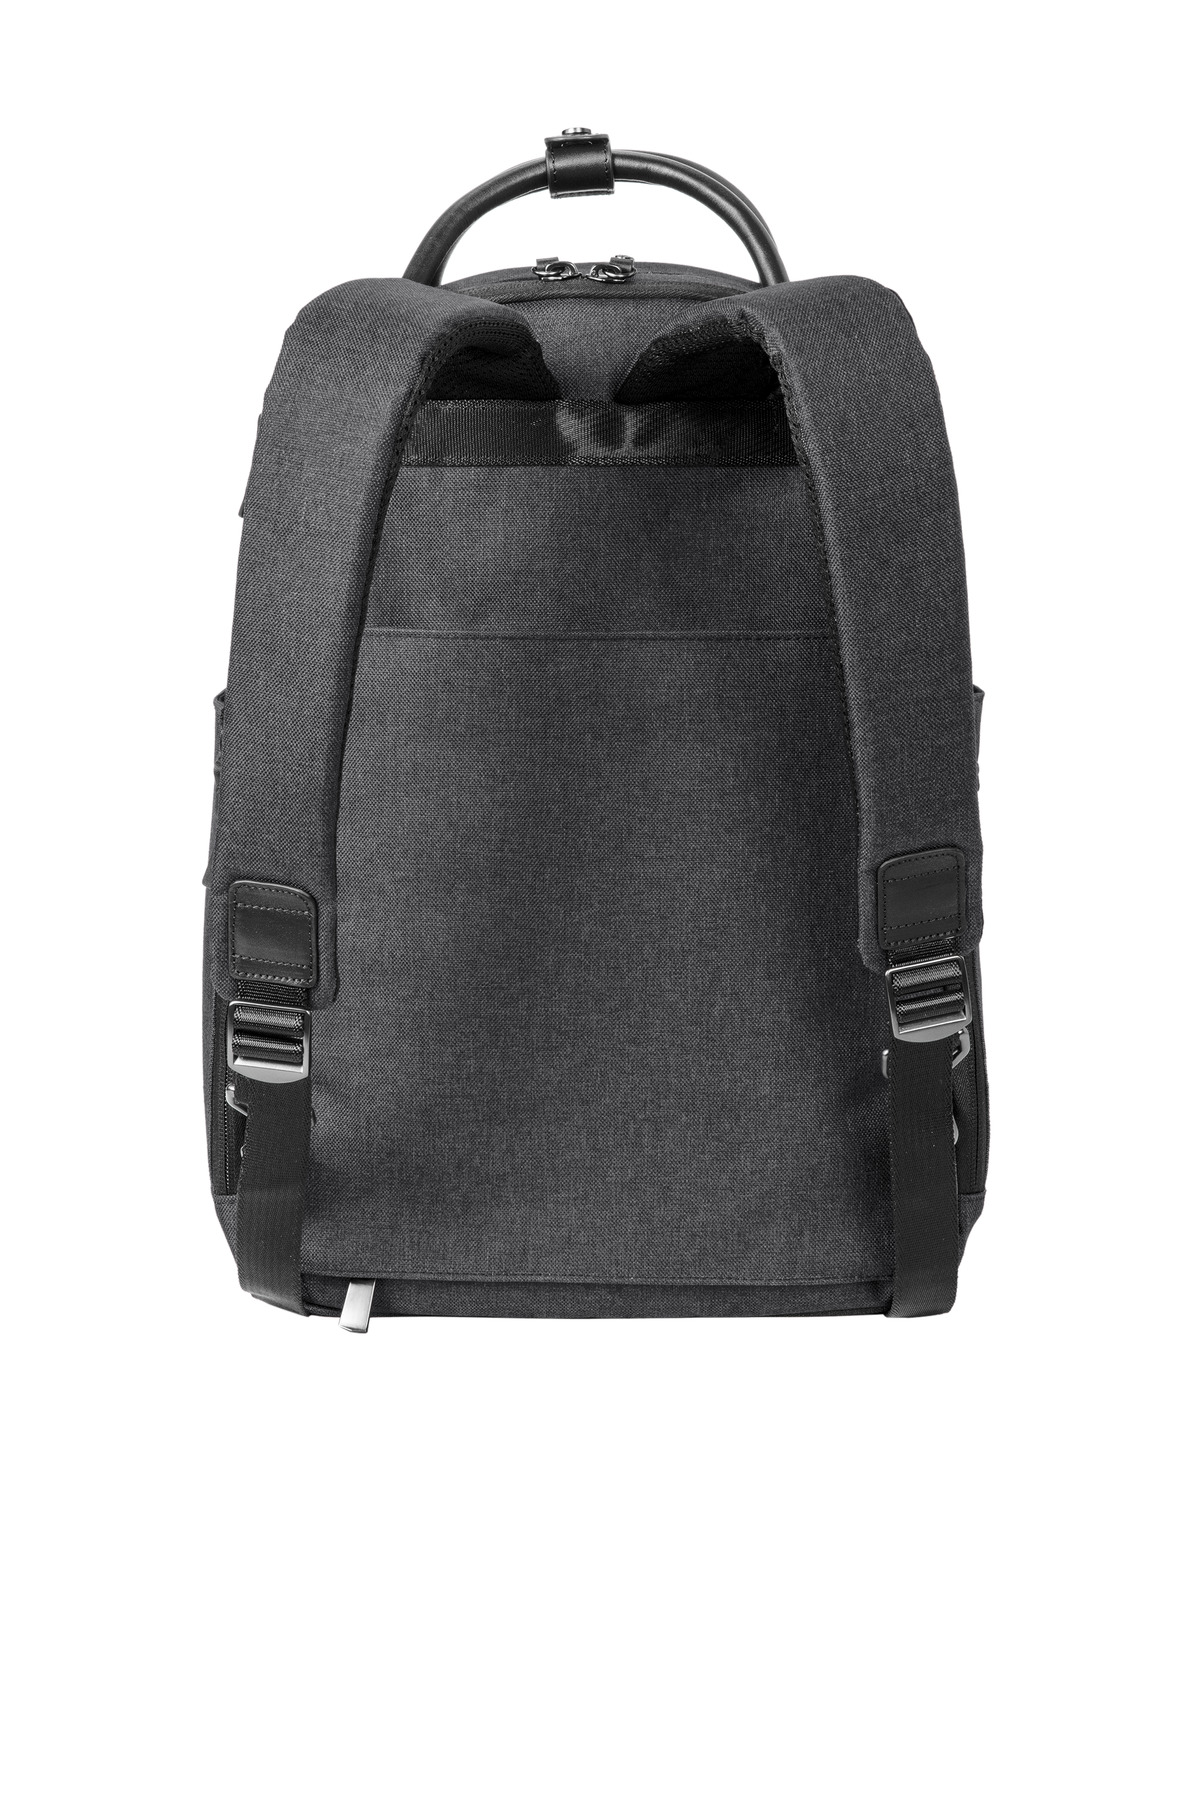 Brooks Brothers ® Grant Dual-Handle Backpack BB18821